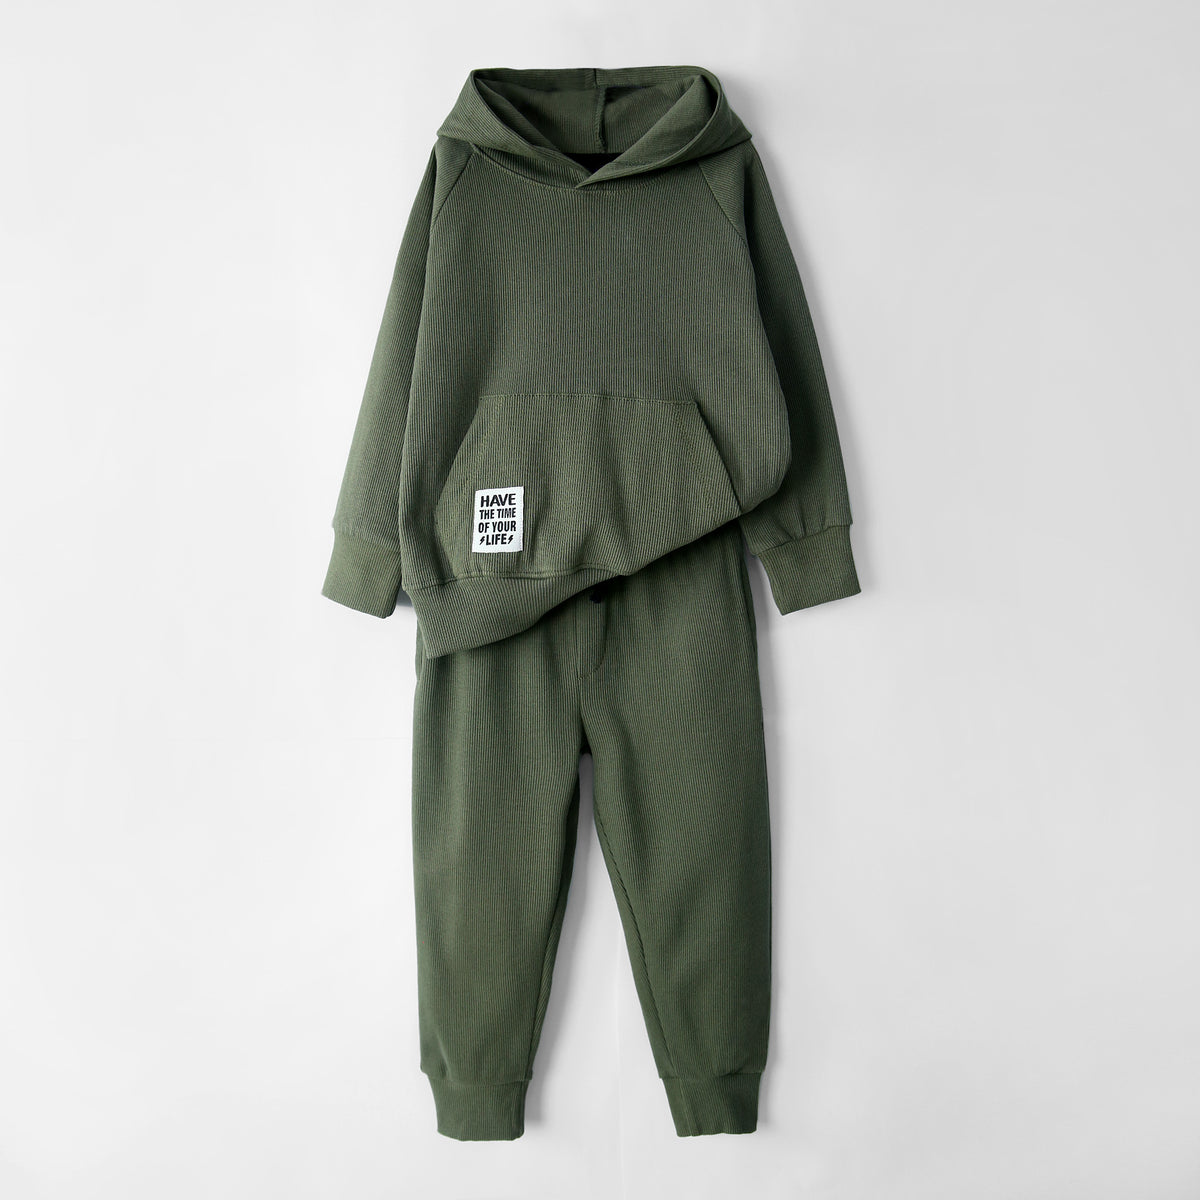 Premium Quality 2 Piece Olive TrackSuit For Kids